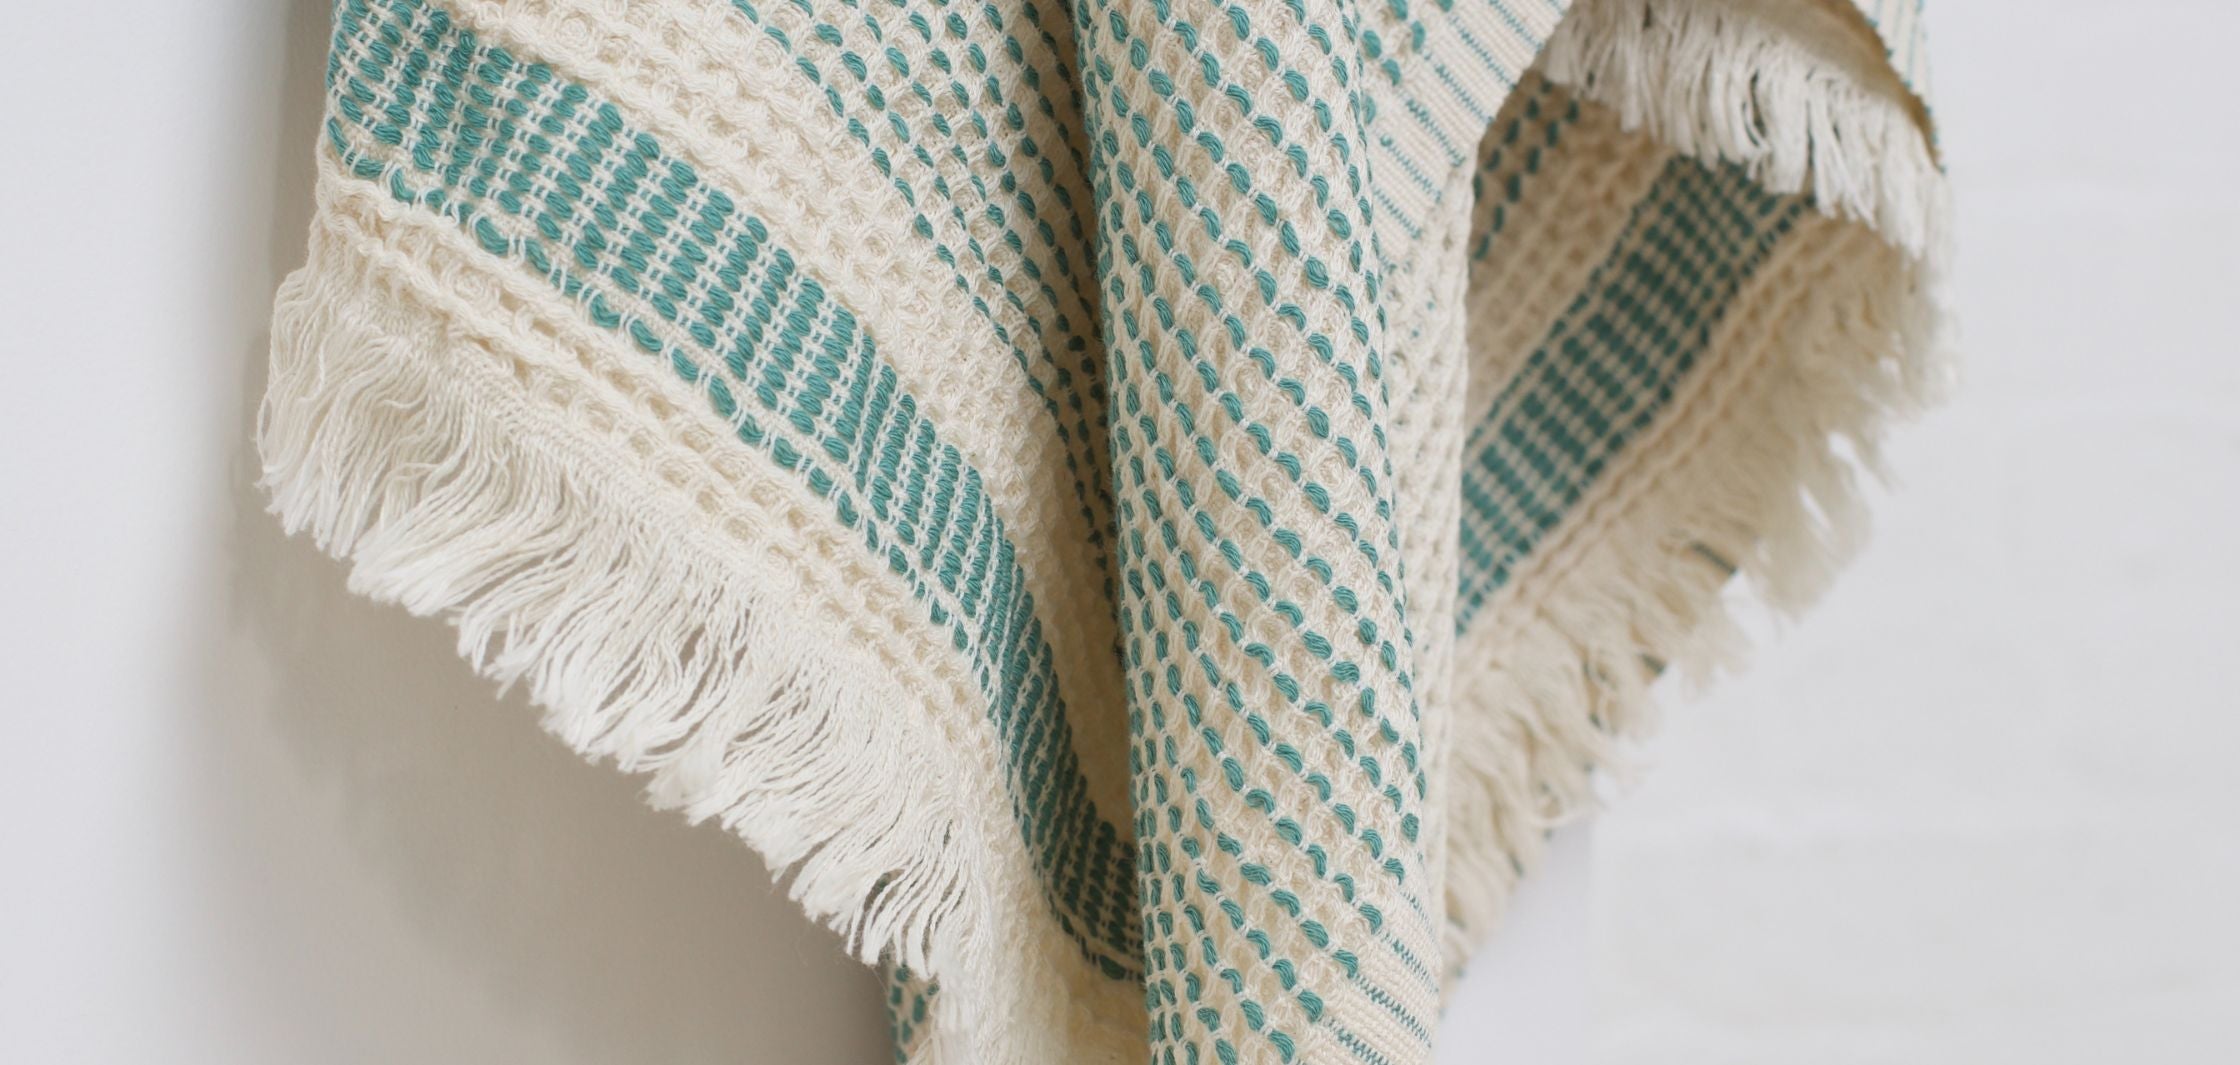 Kalkan Beach Towel displayed in three vibrant colors-sage green, chocolate brown, mustard, and copper